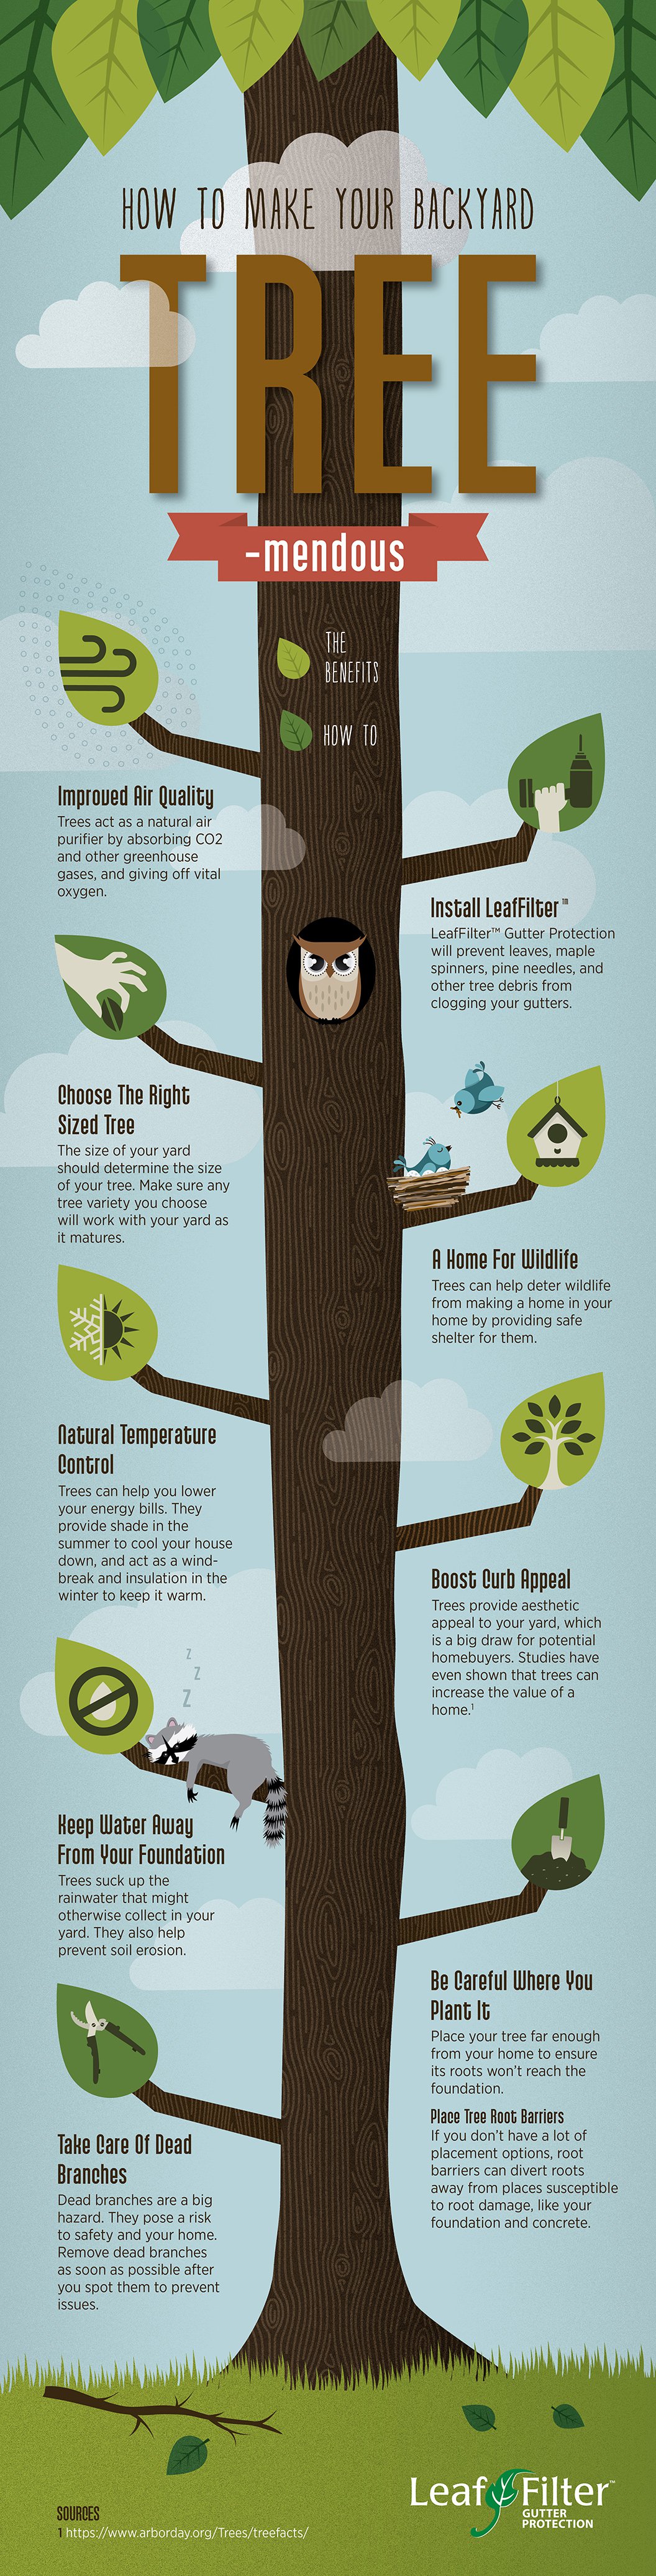 How to make your backyard tree-mendous infographic